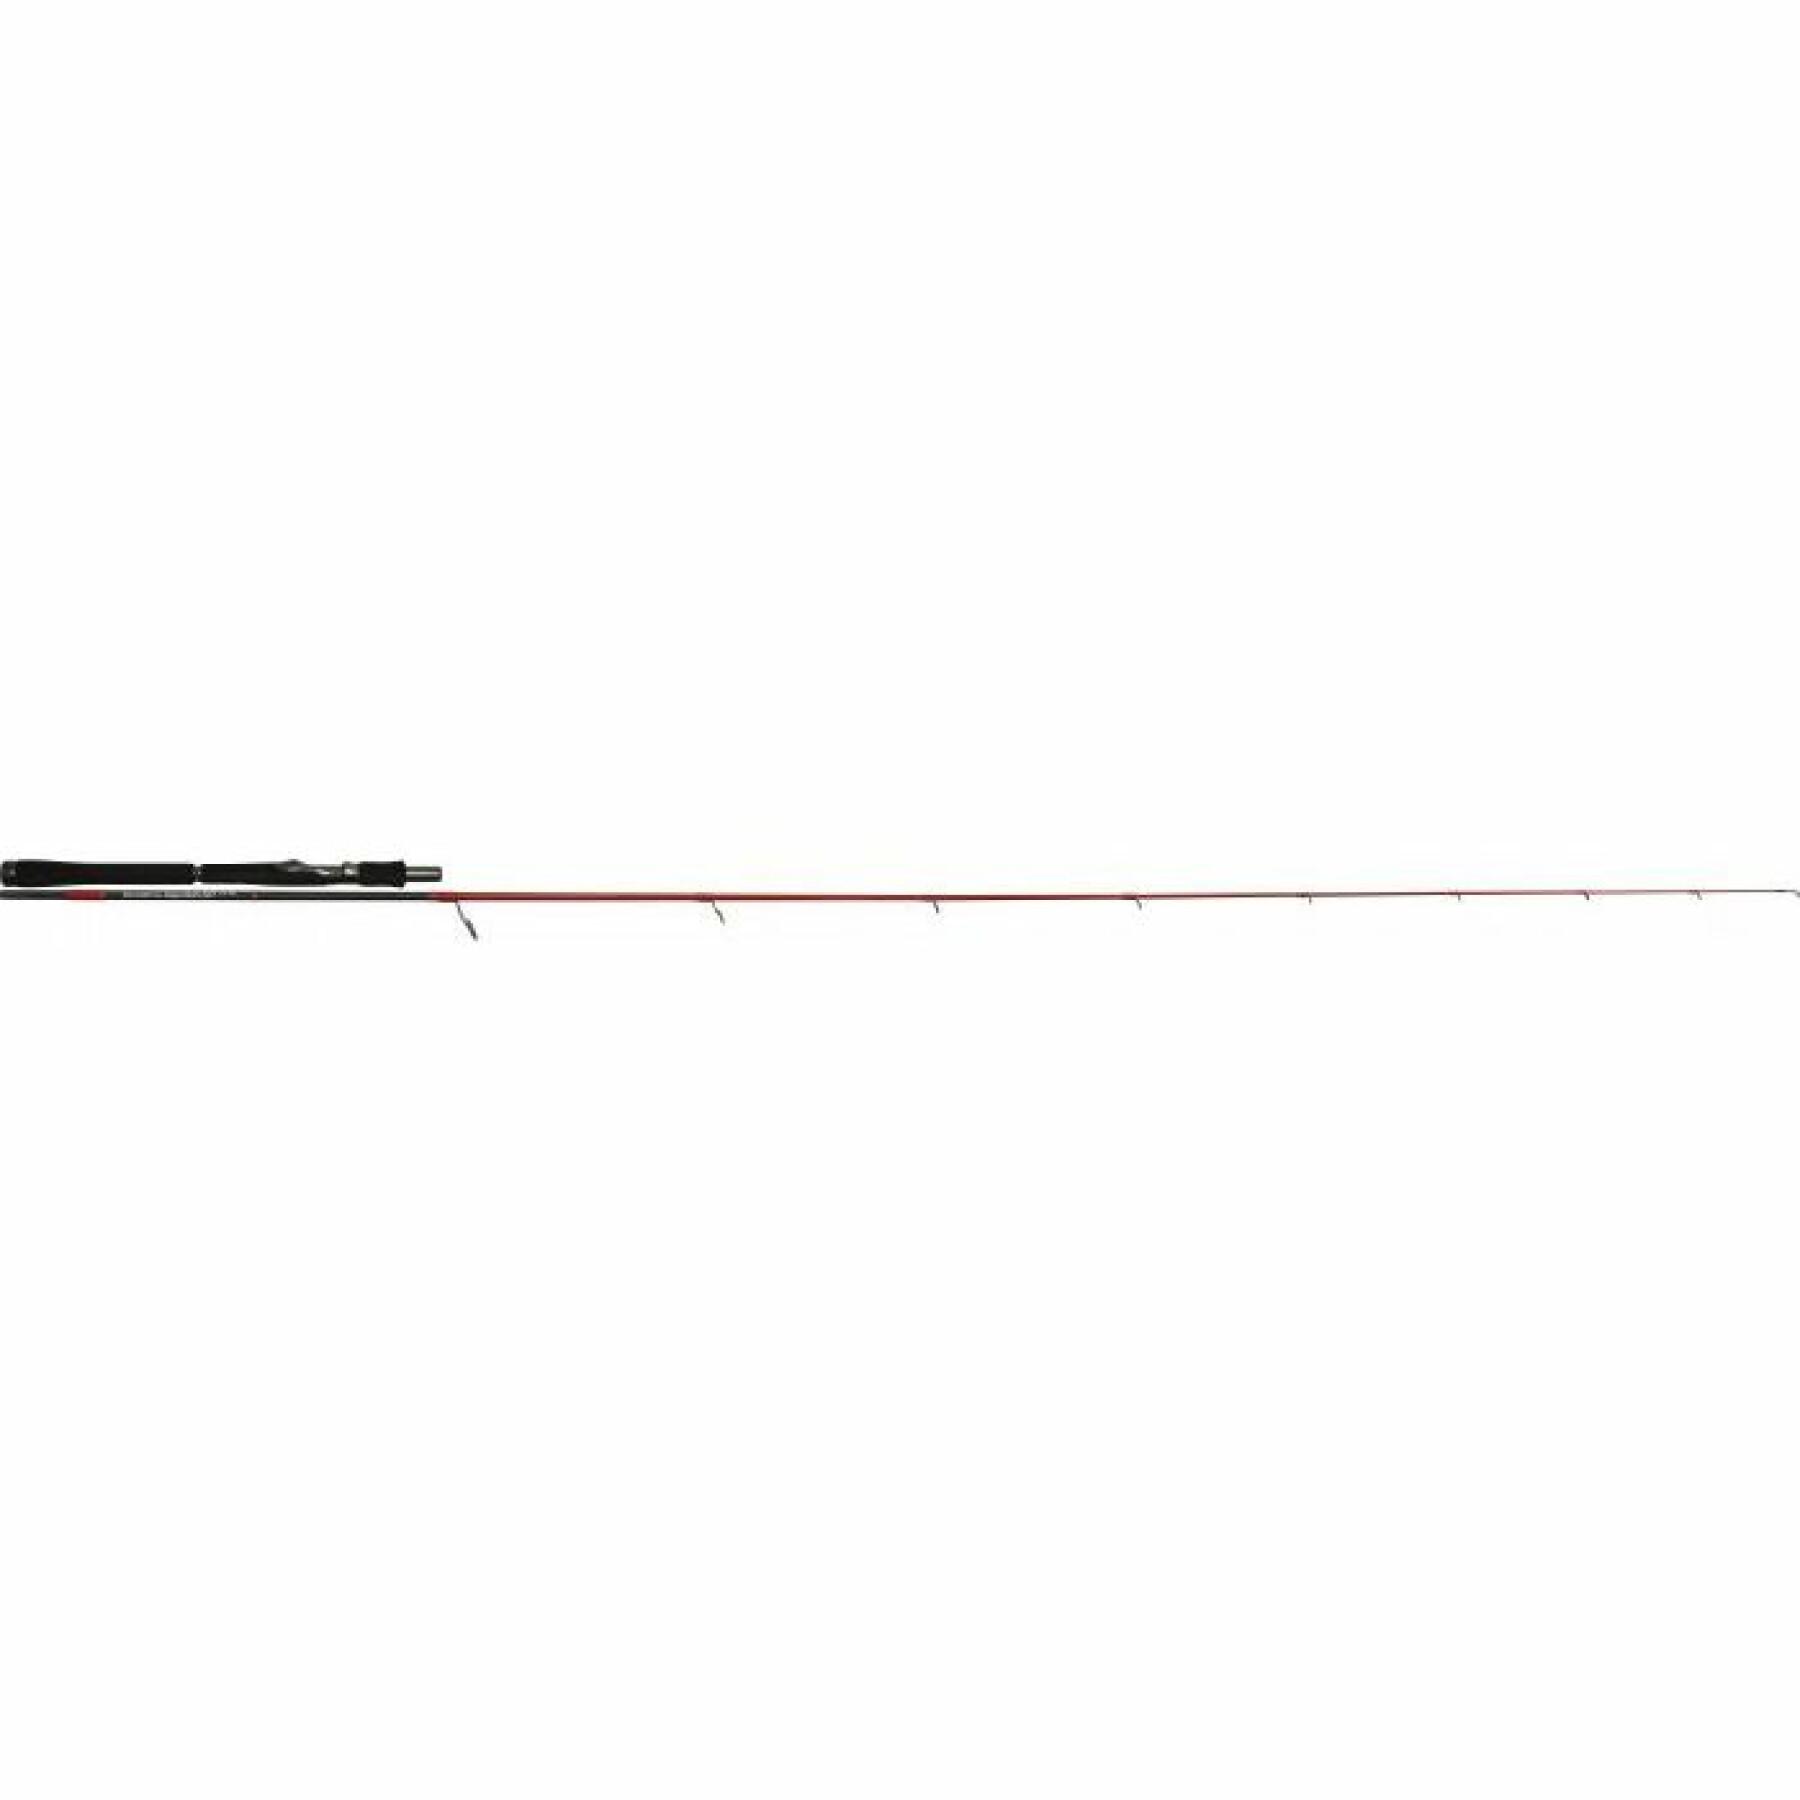 Spinstang Tenryu Injection SP 75ML 3-18g